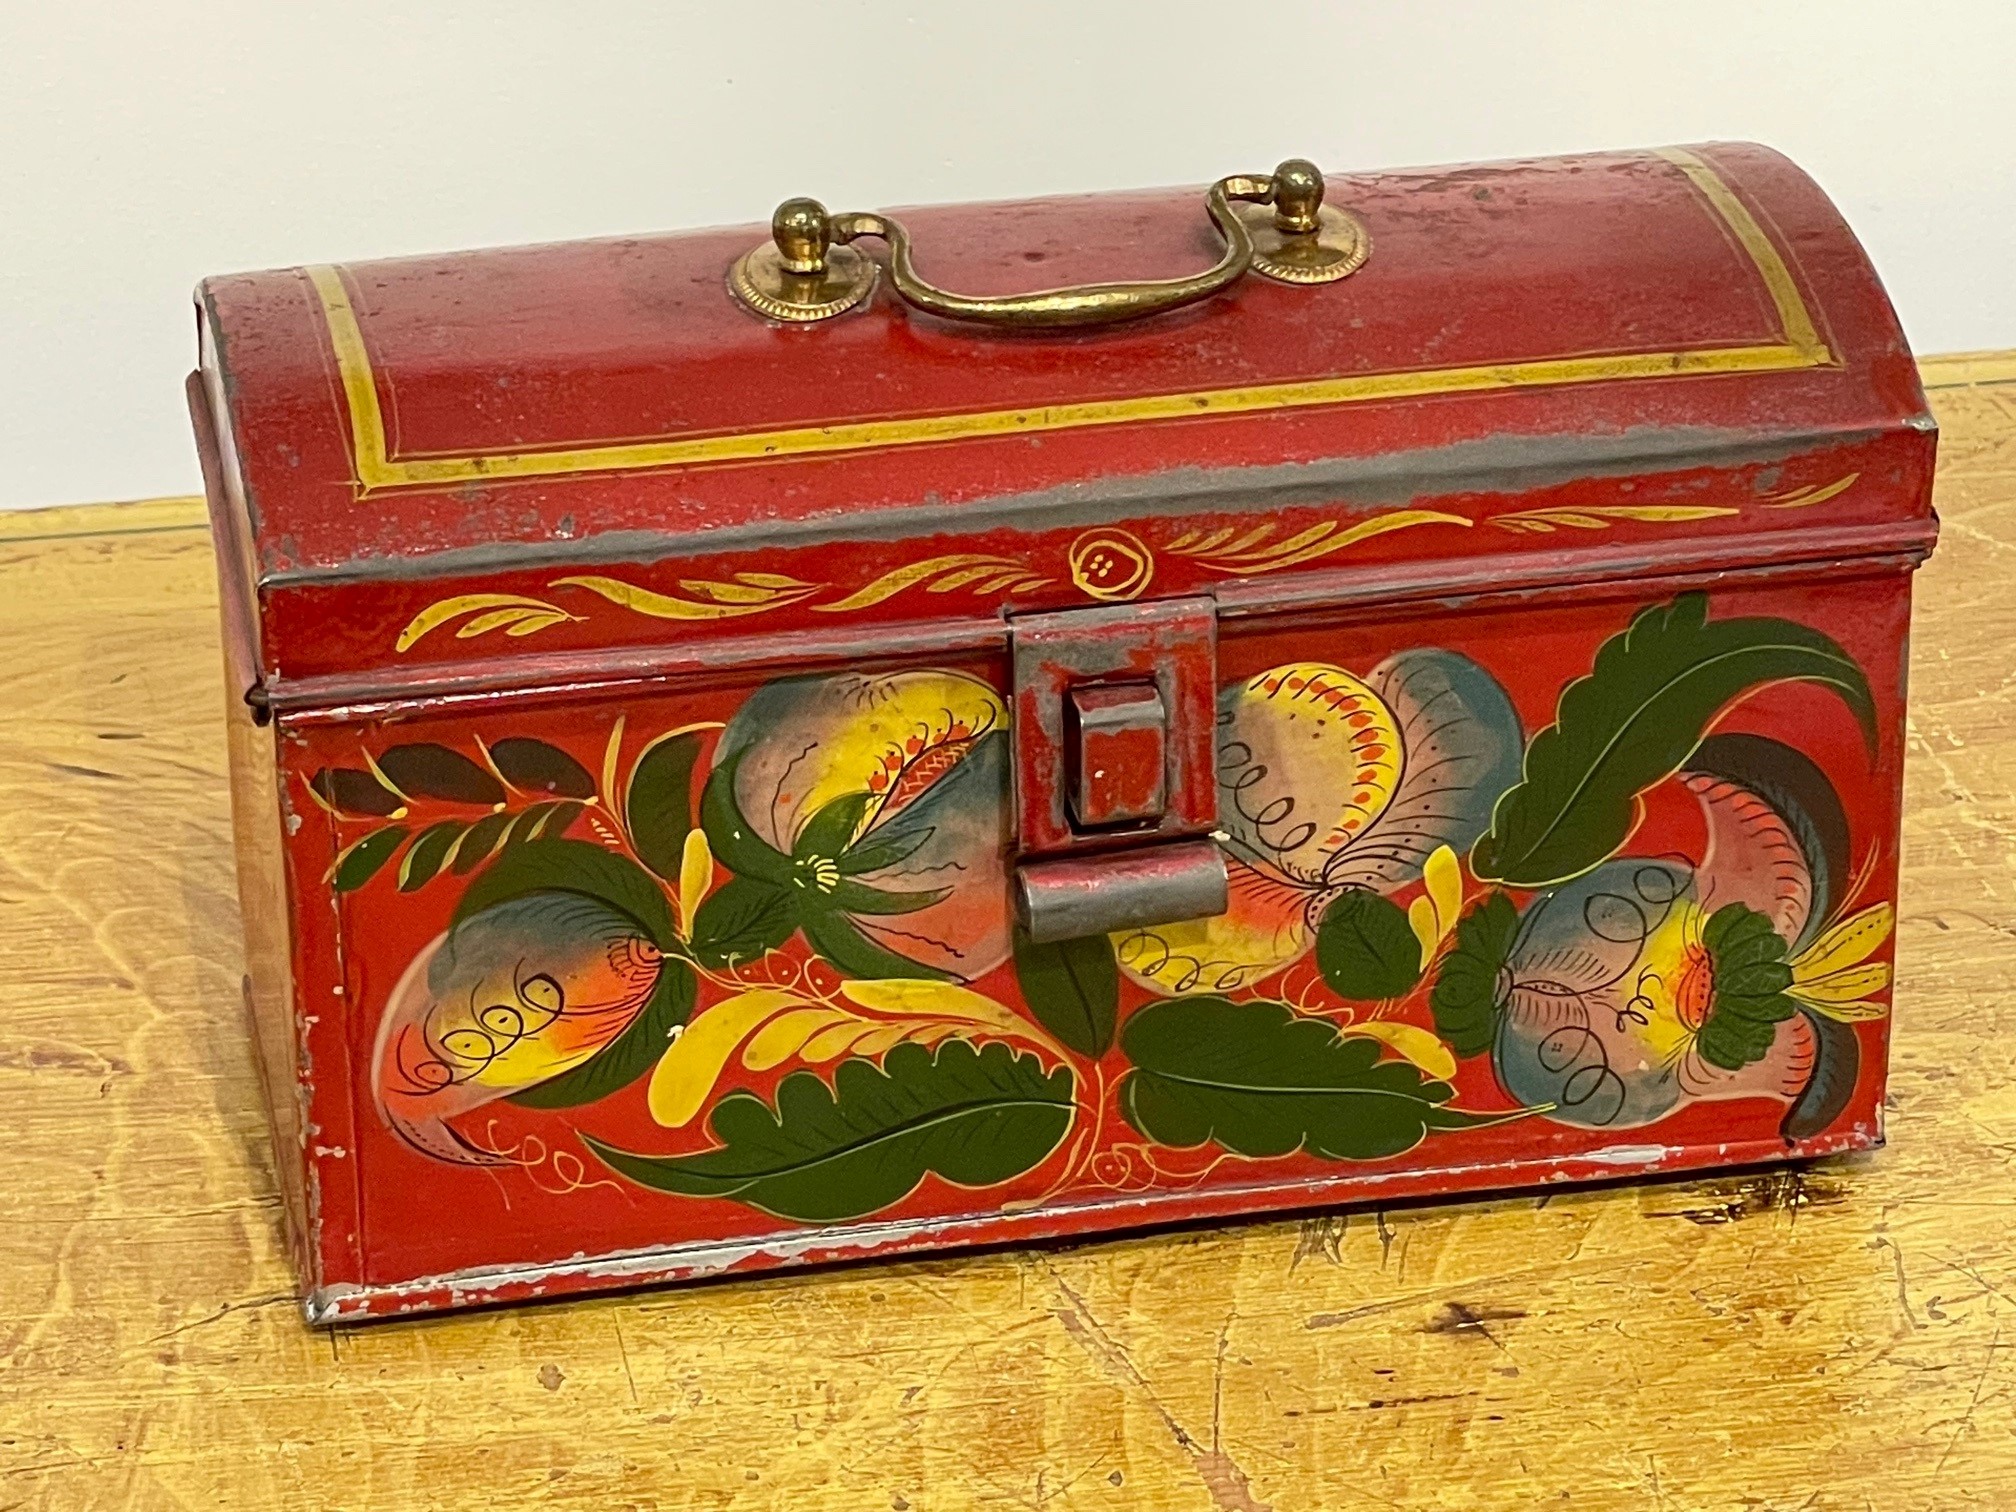 painted toleware document box rel=